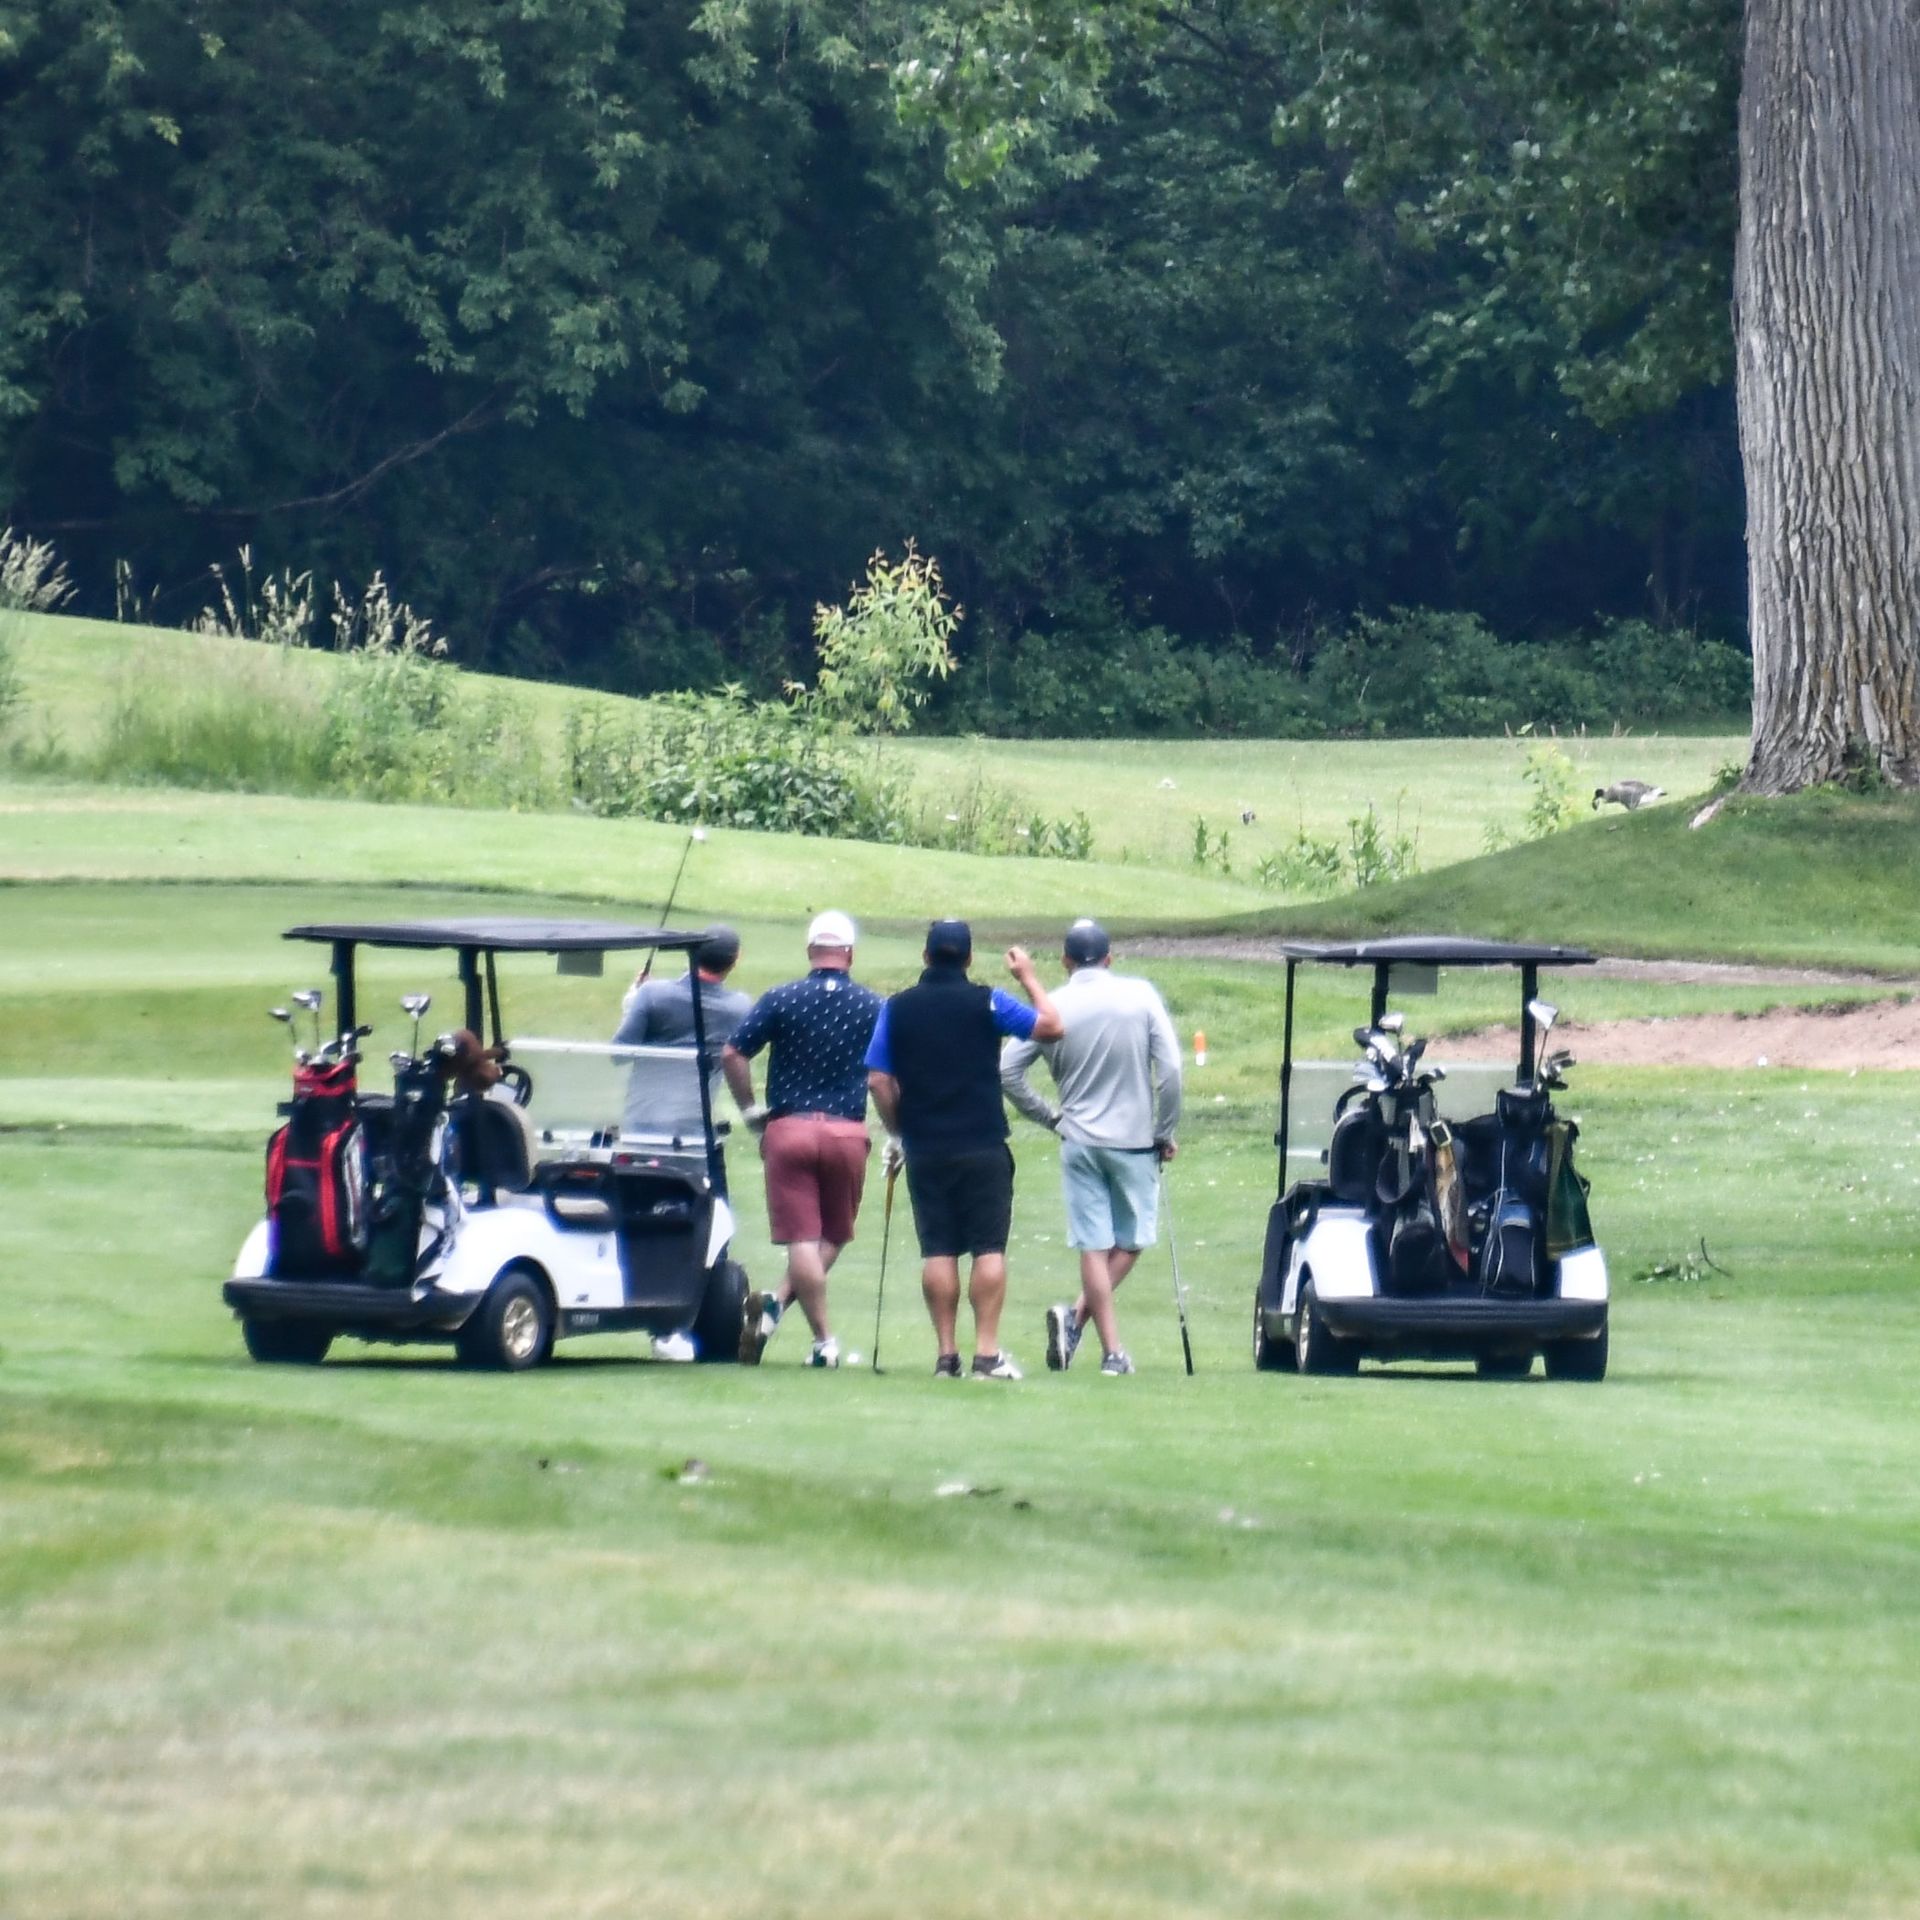 Two golf carts and four golfers who are looking away from the camera, at the course.